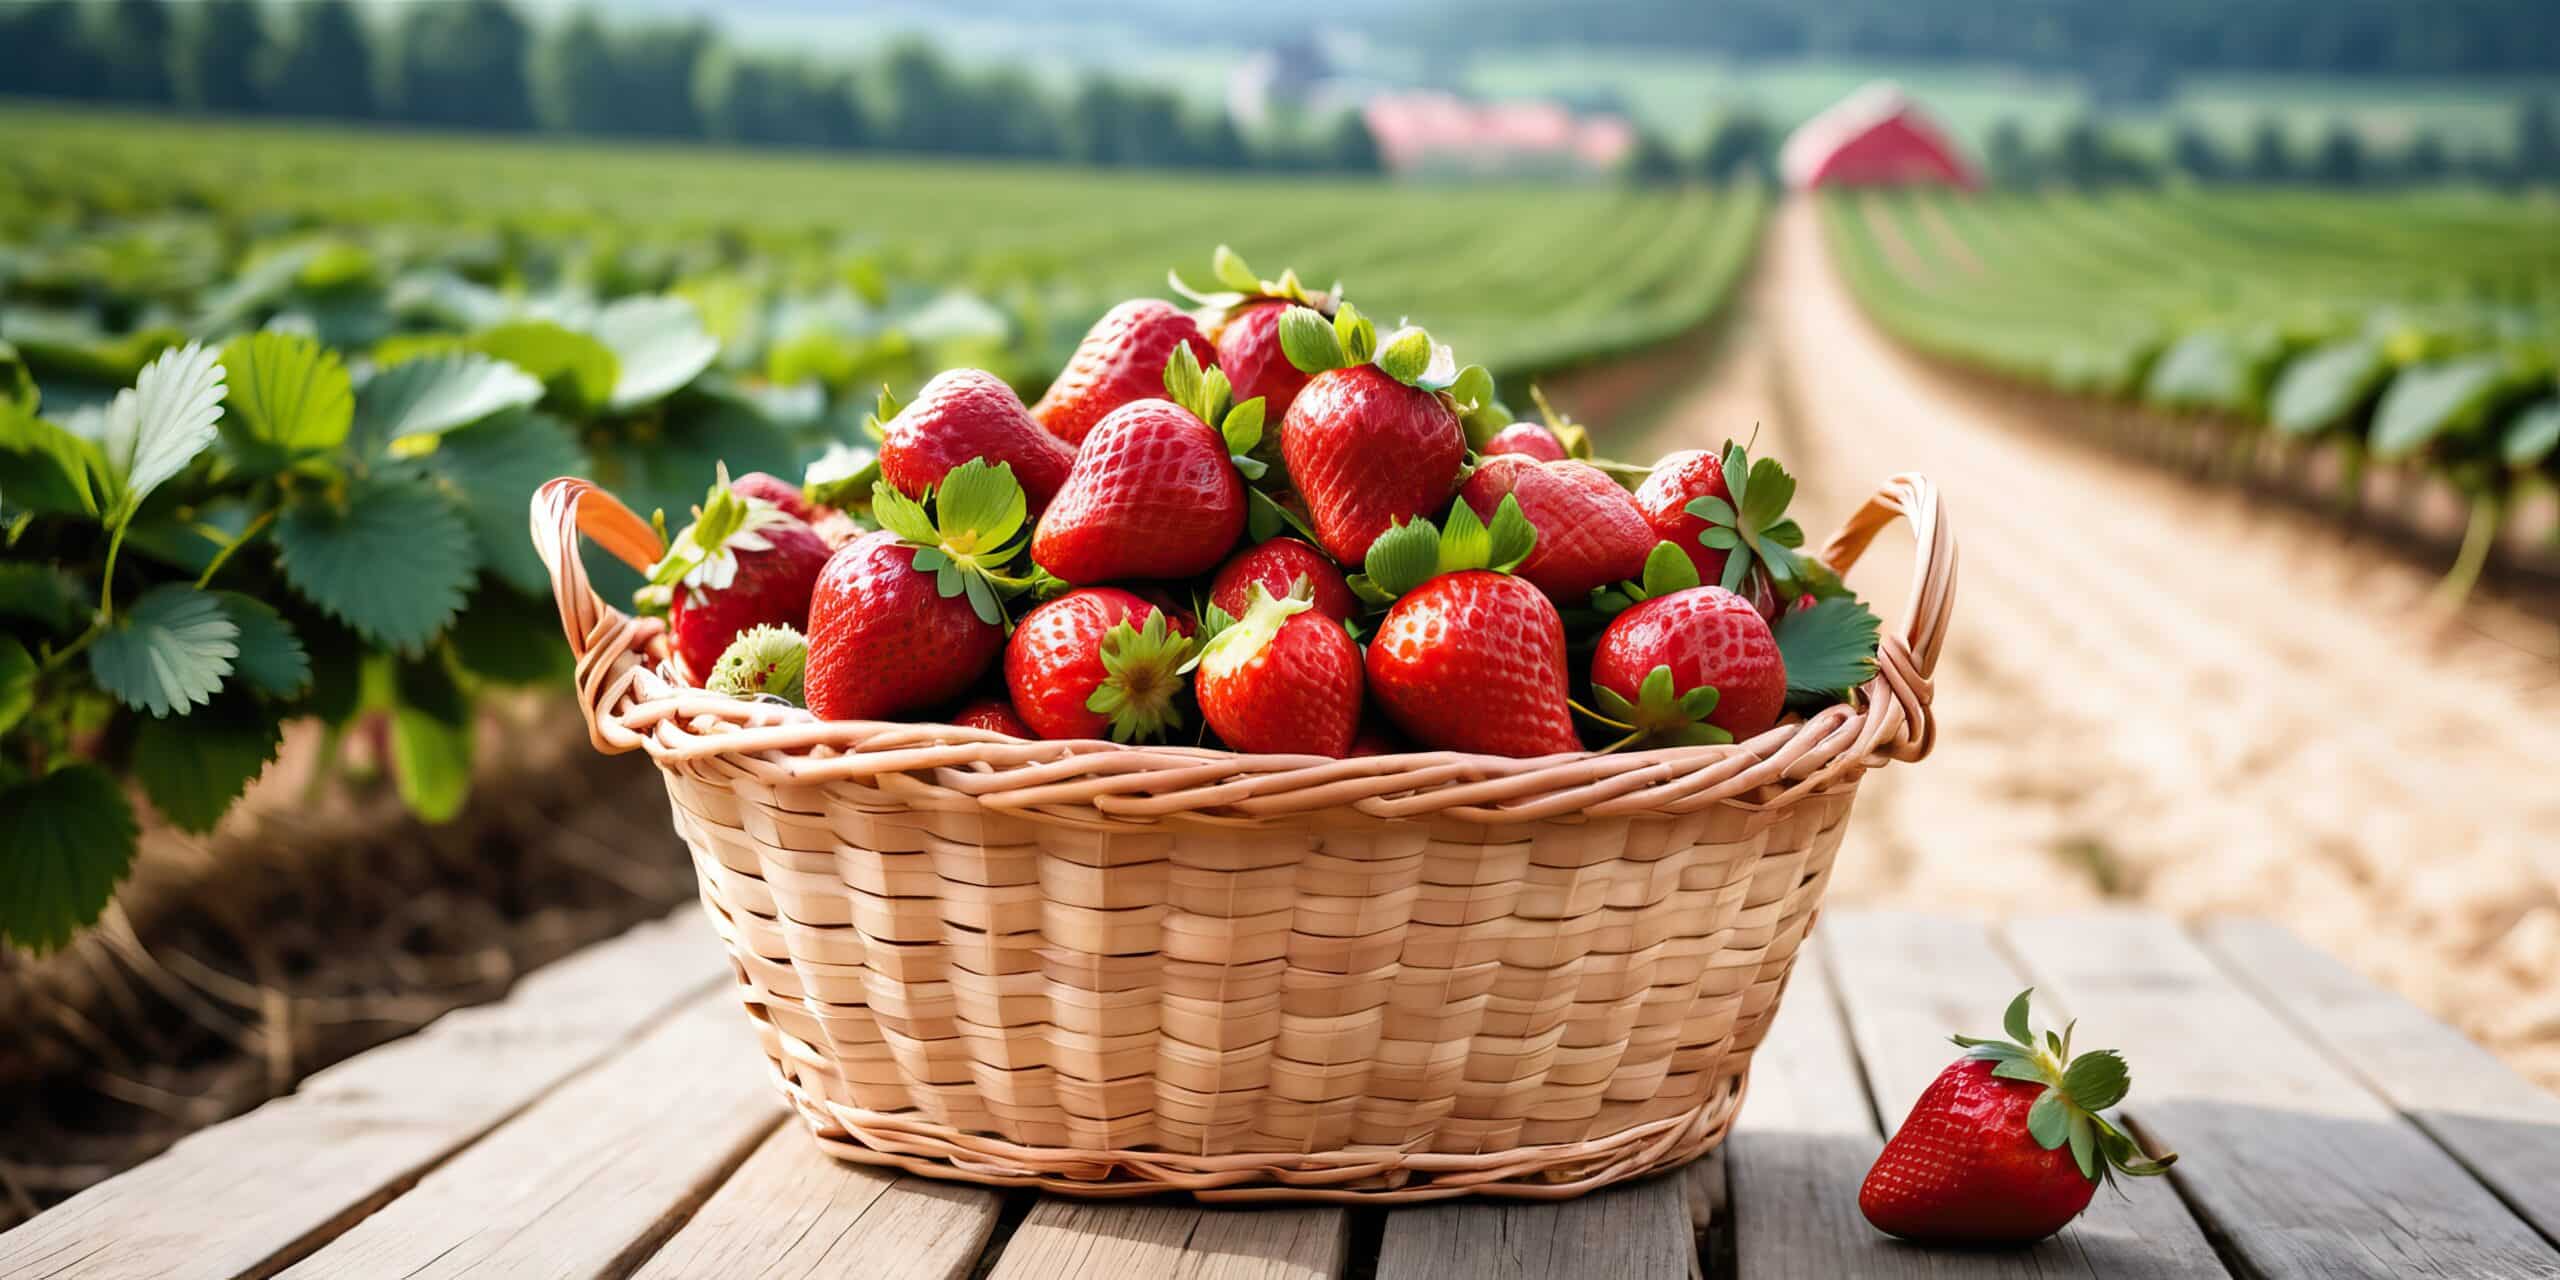 growmyownhealthfood.com : How many strawberries do you get from one plant?